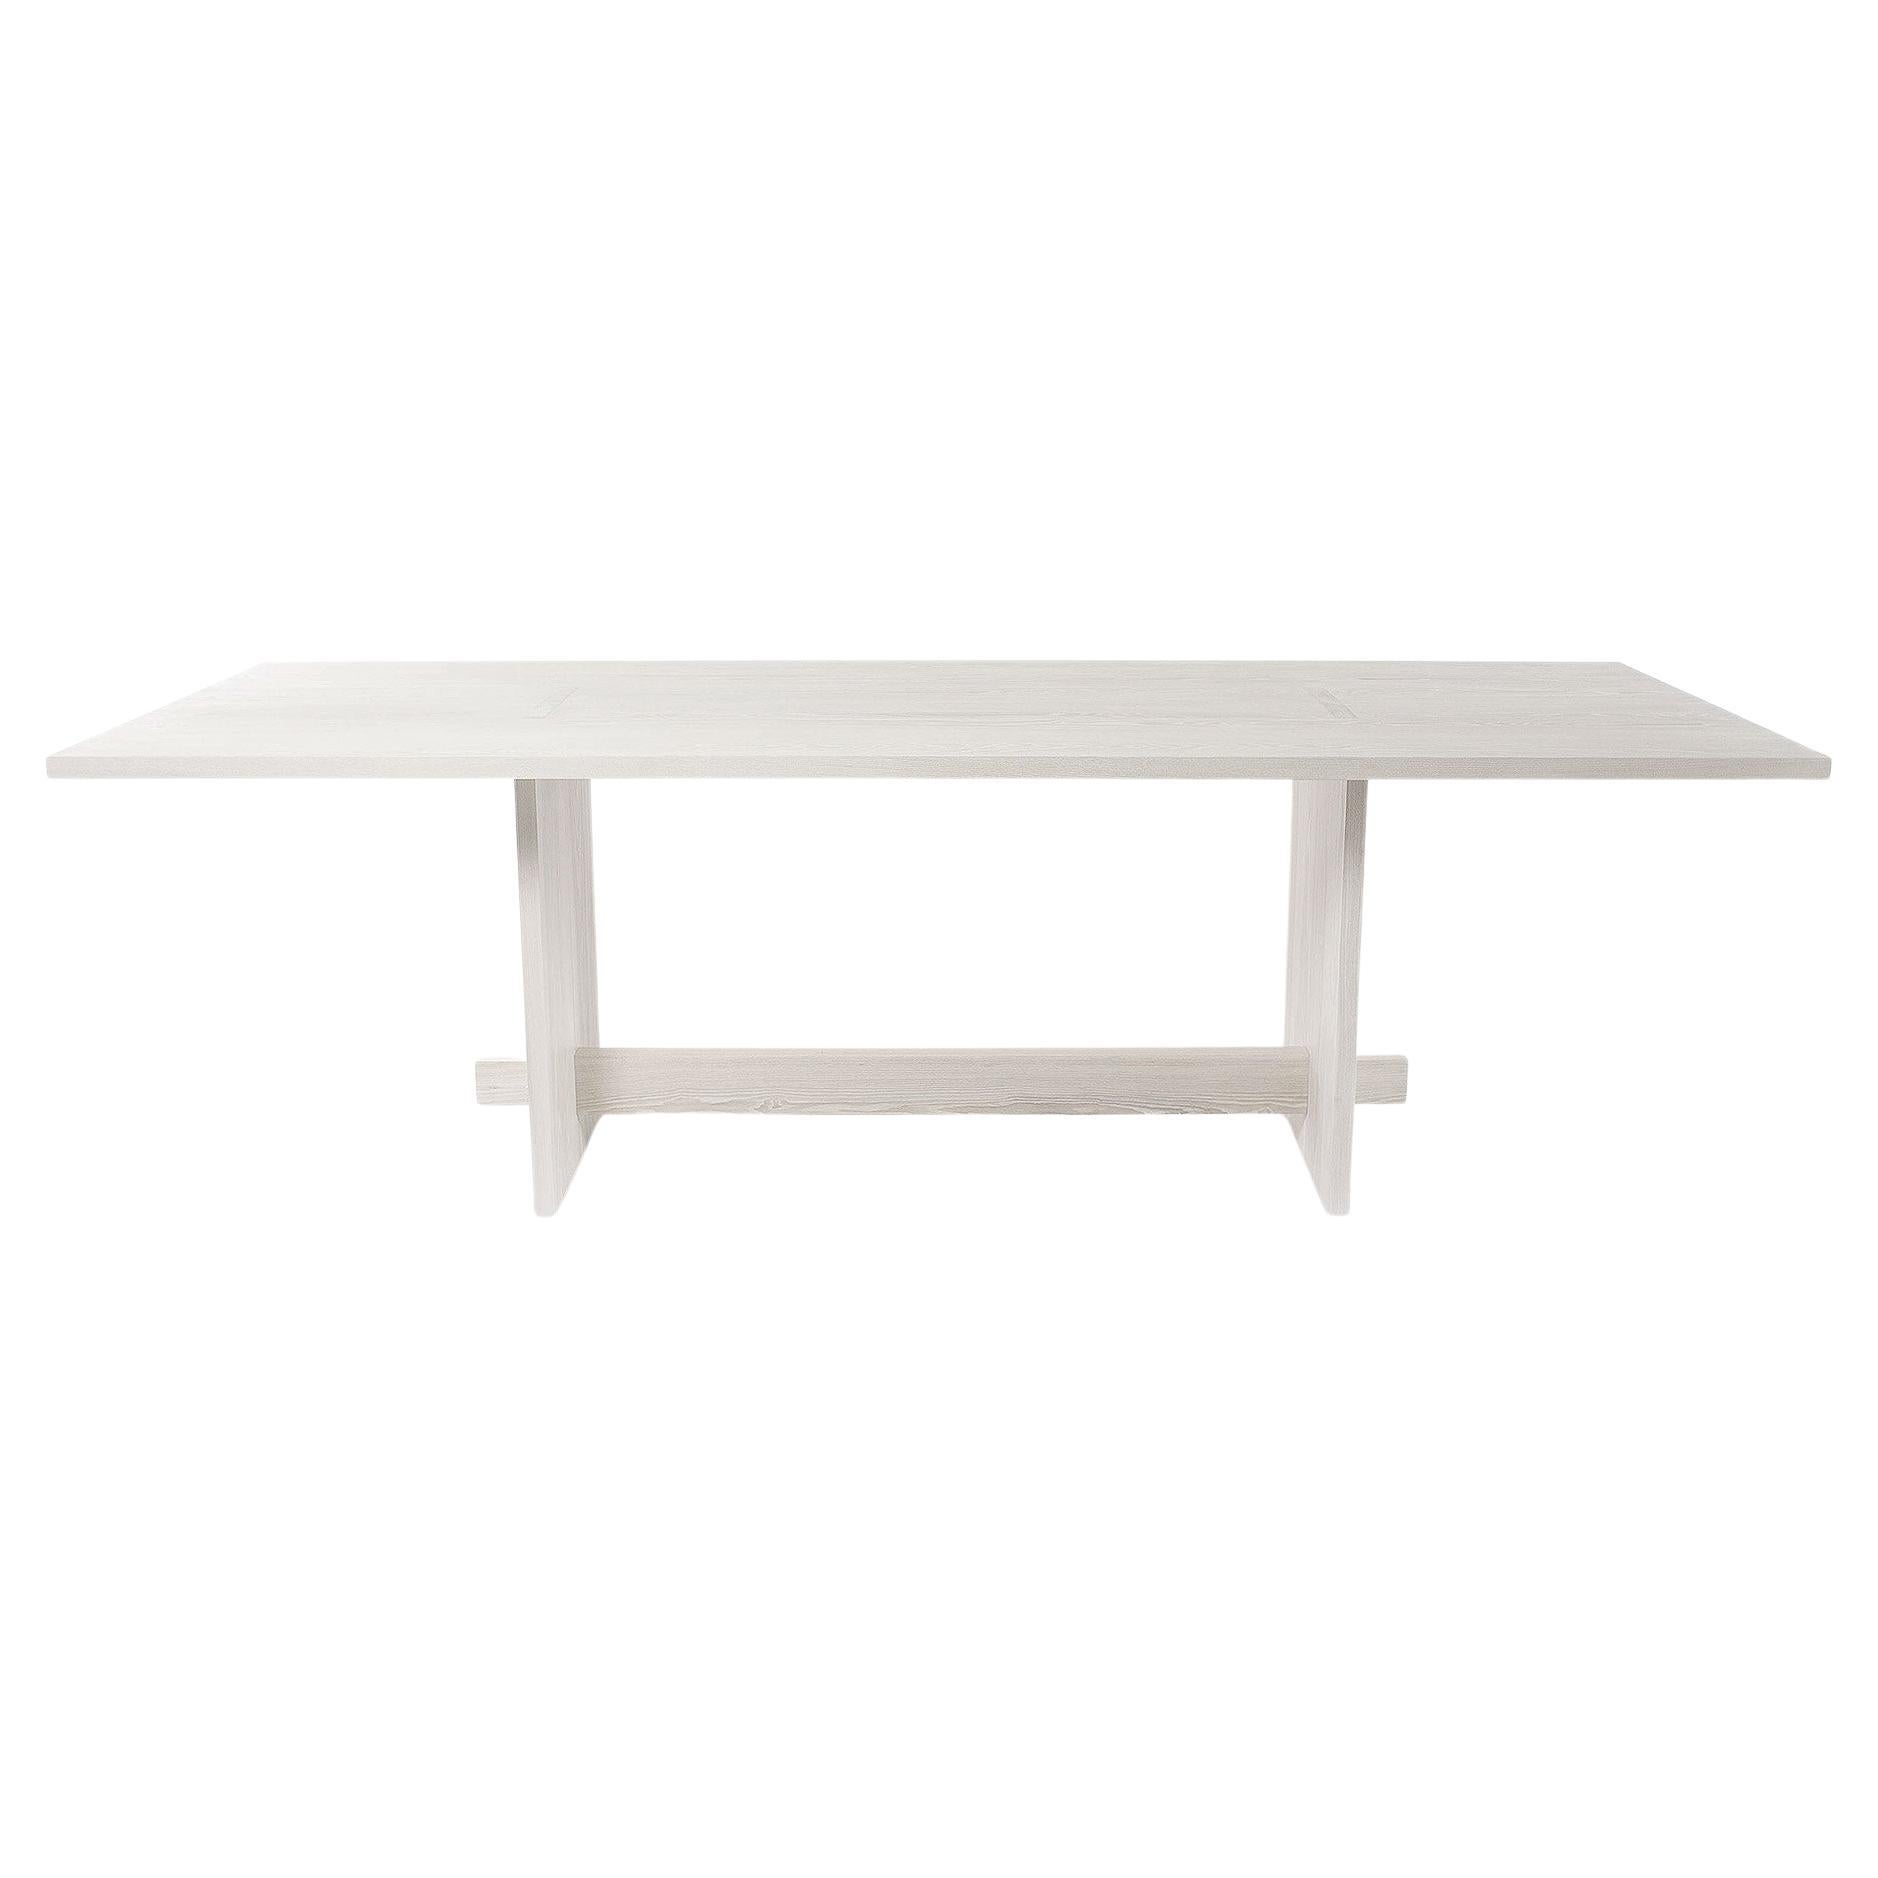 Handcrafted Solid White Ash Himes Dining Table 96"L by Mary Ratcliffe Studio